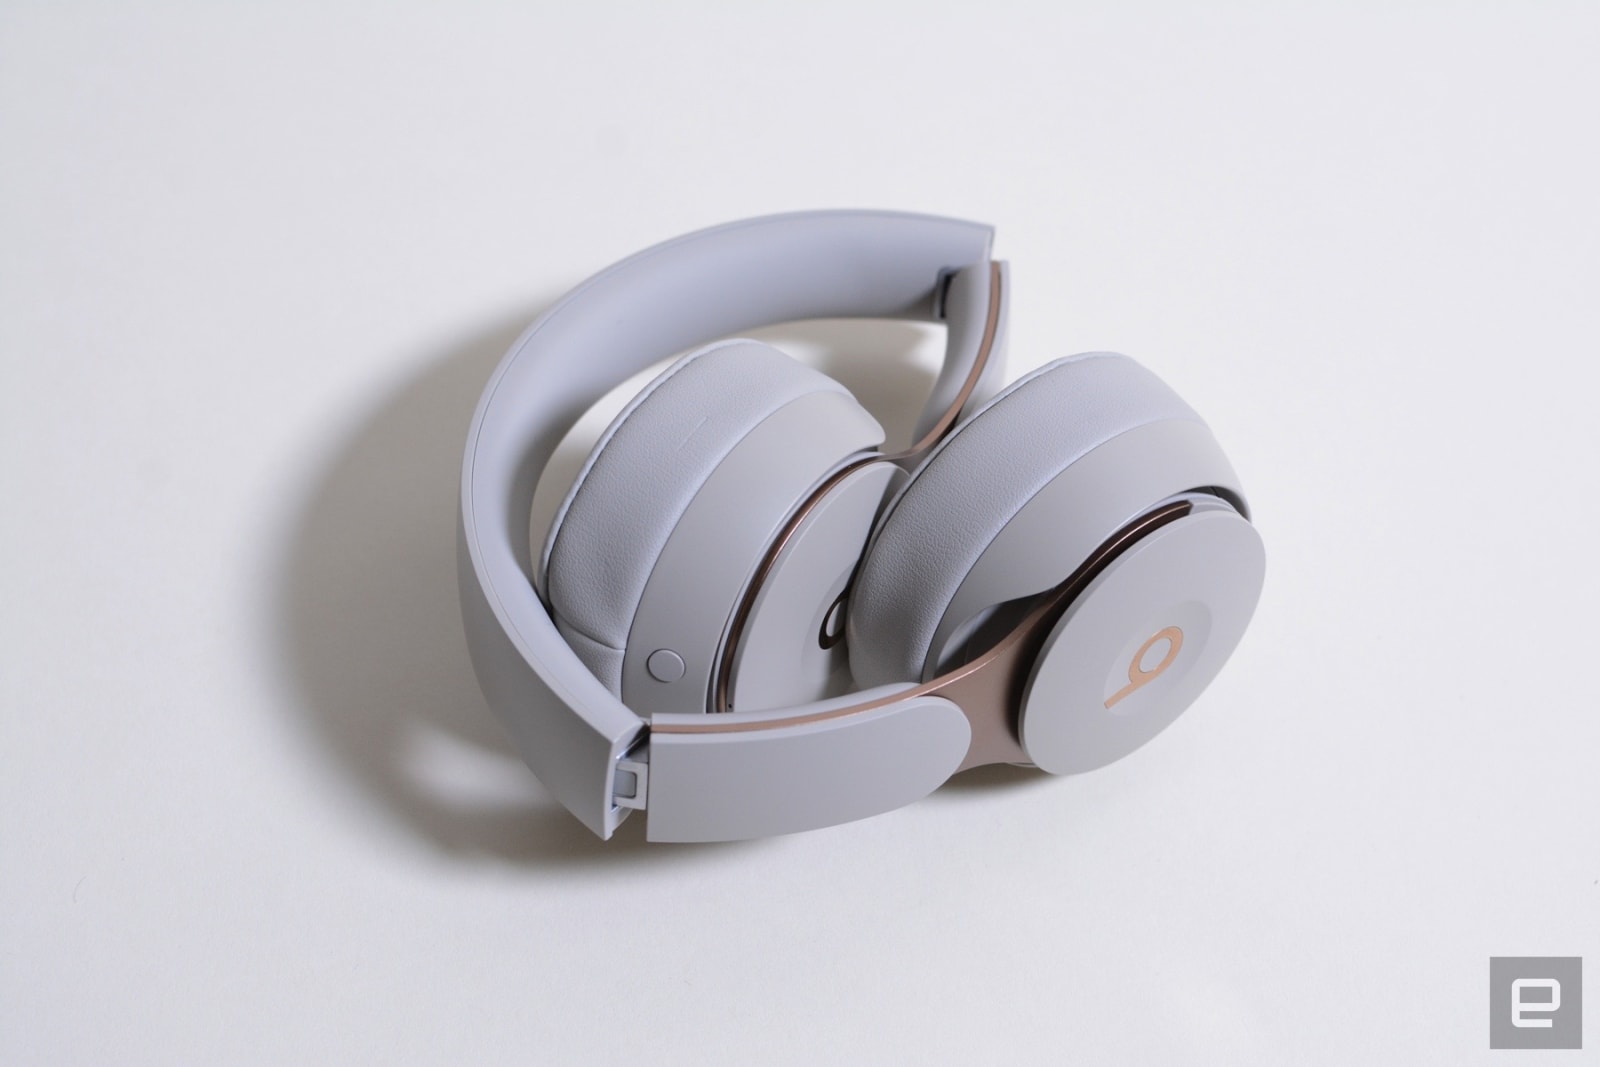 Beats' Solo Pro headphones feature Pure ANC and alwayson